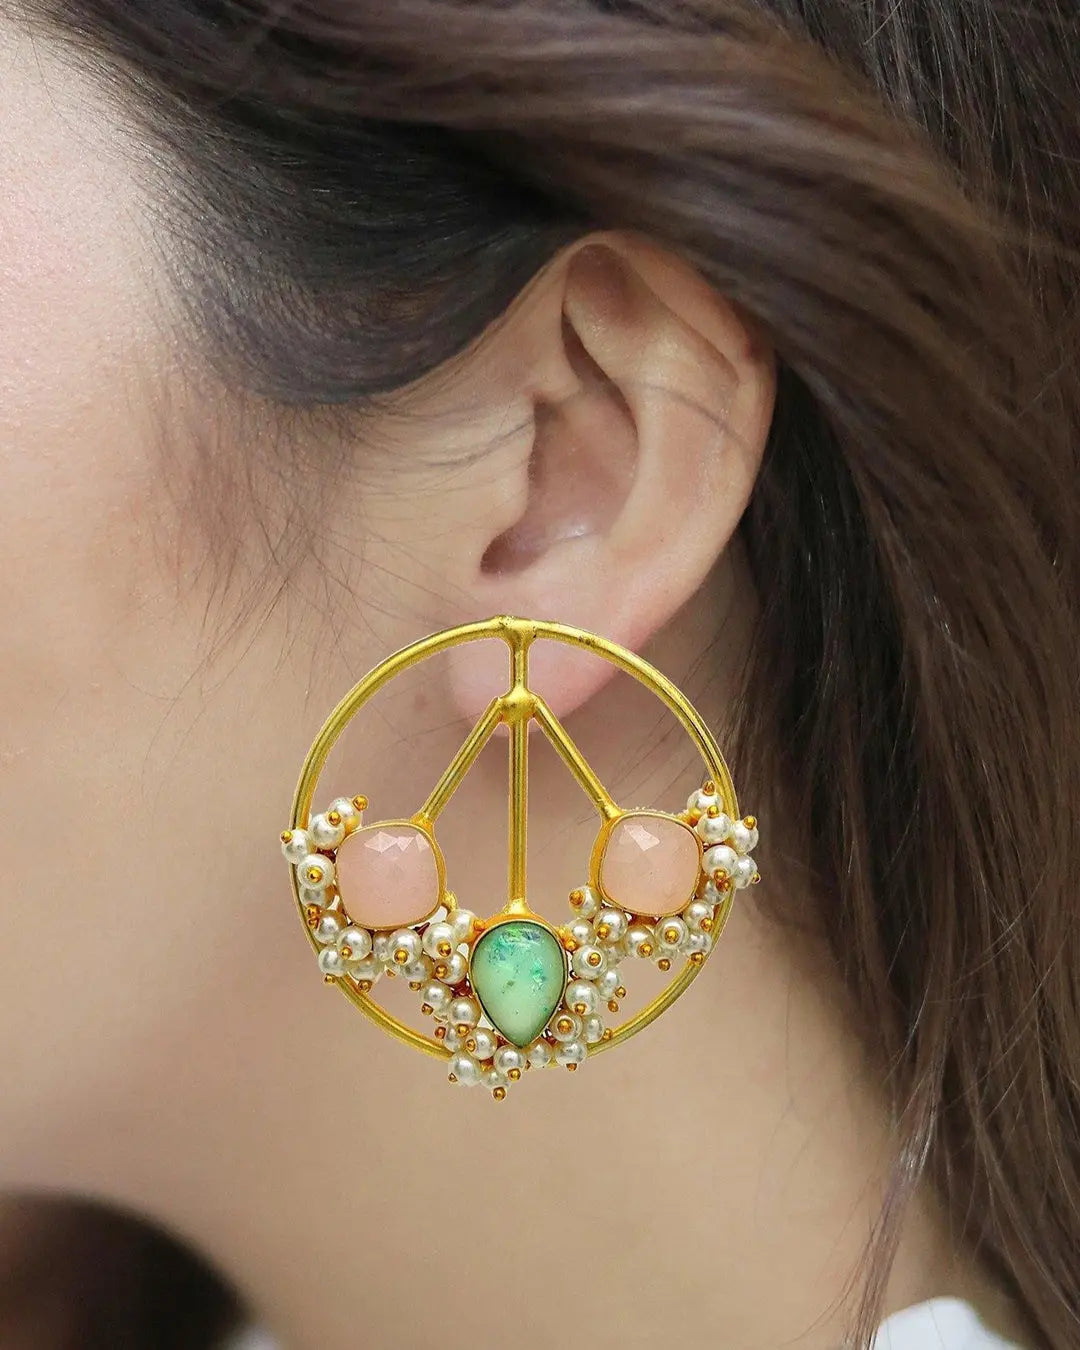 Medalion Earrings- Handcrafted Jewellery from Dori